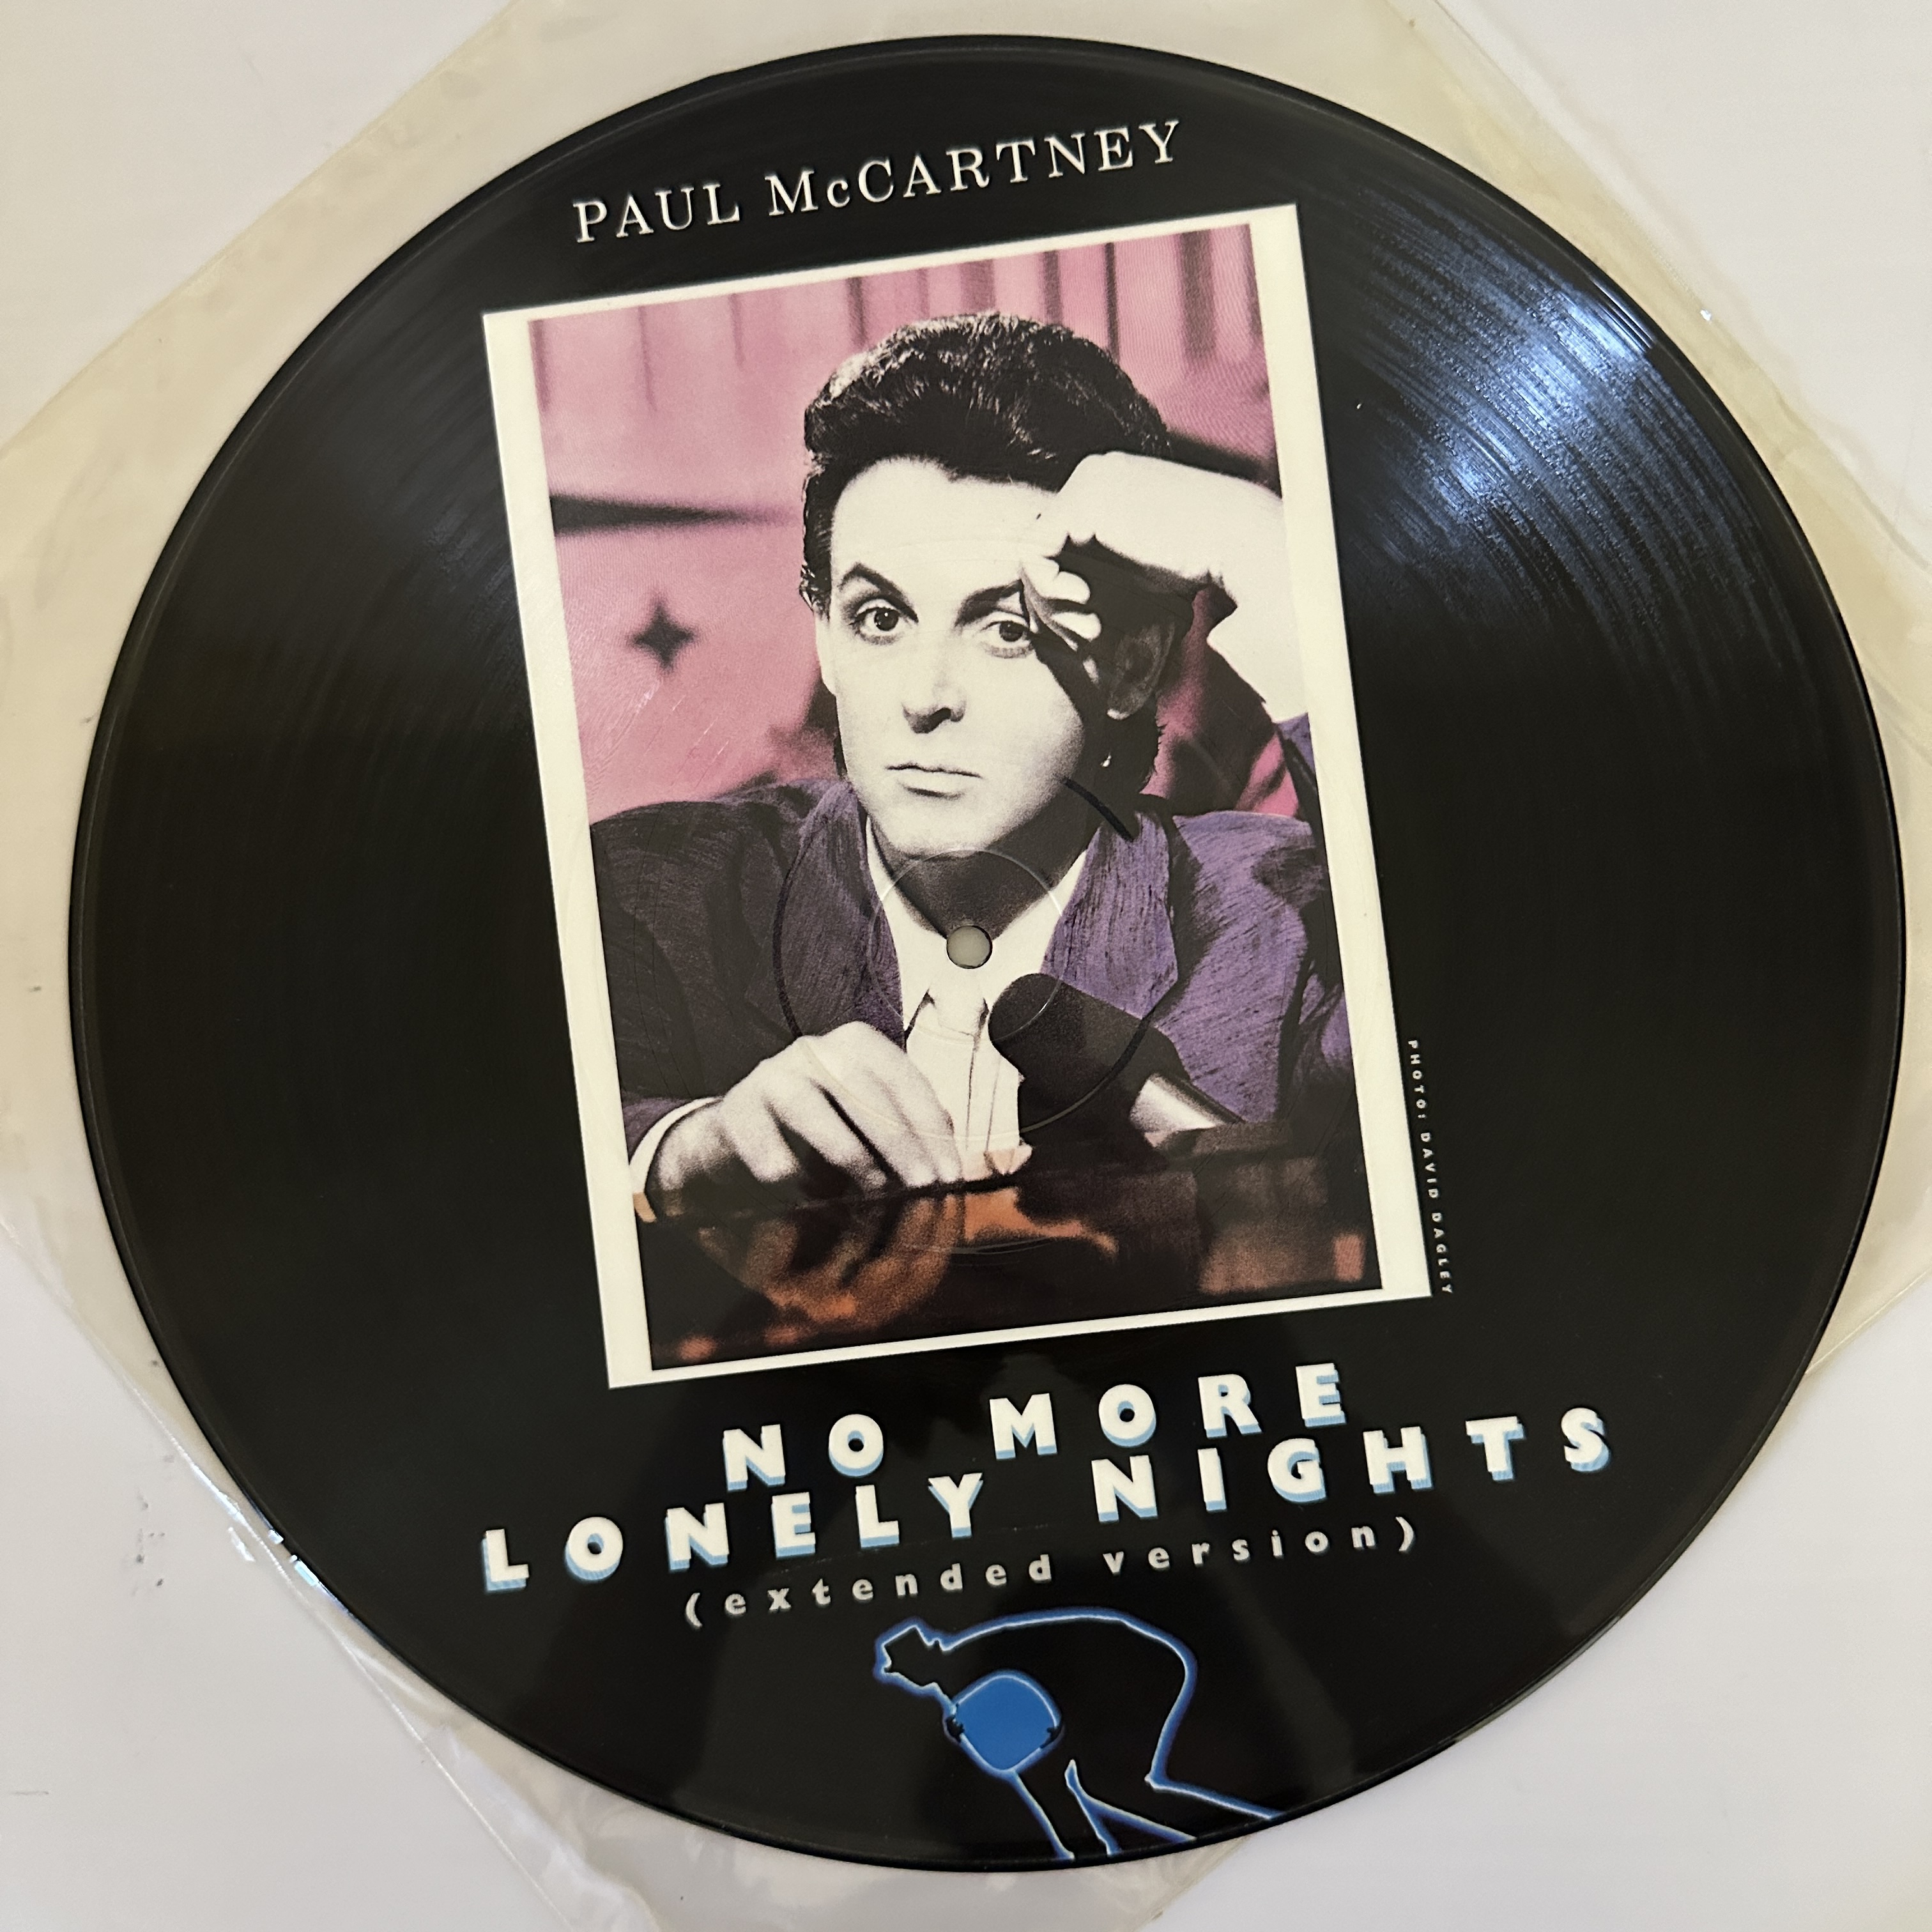 A Paul McCartney and Wings - No More Lonely Nights vinyl Lp - Image 3 of 4